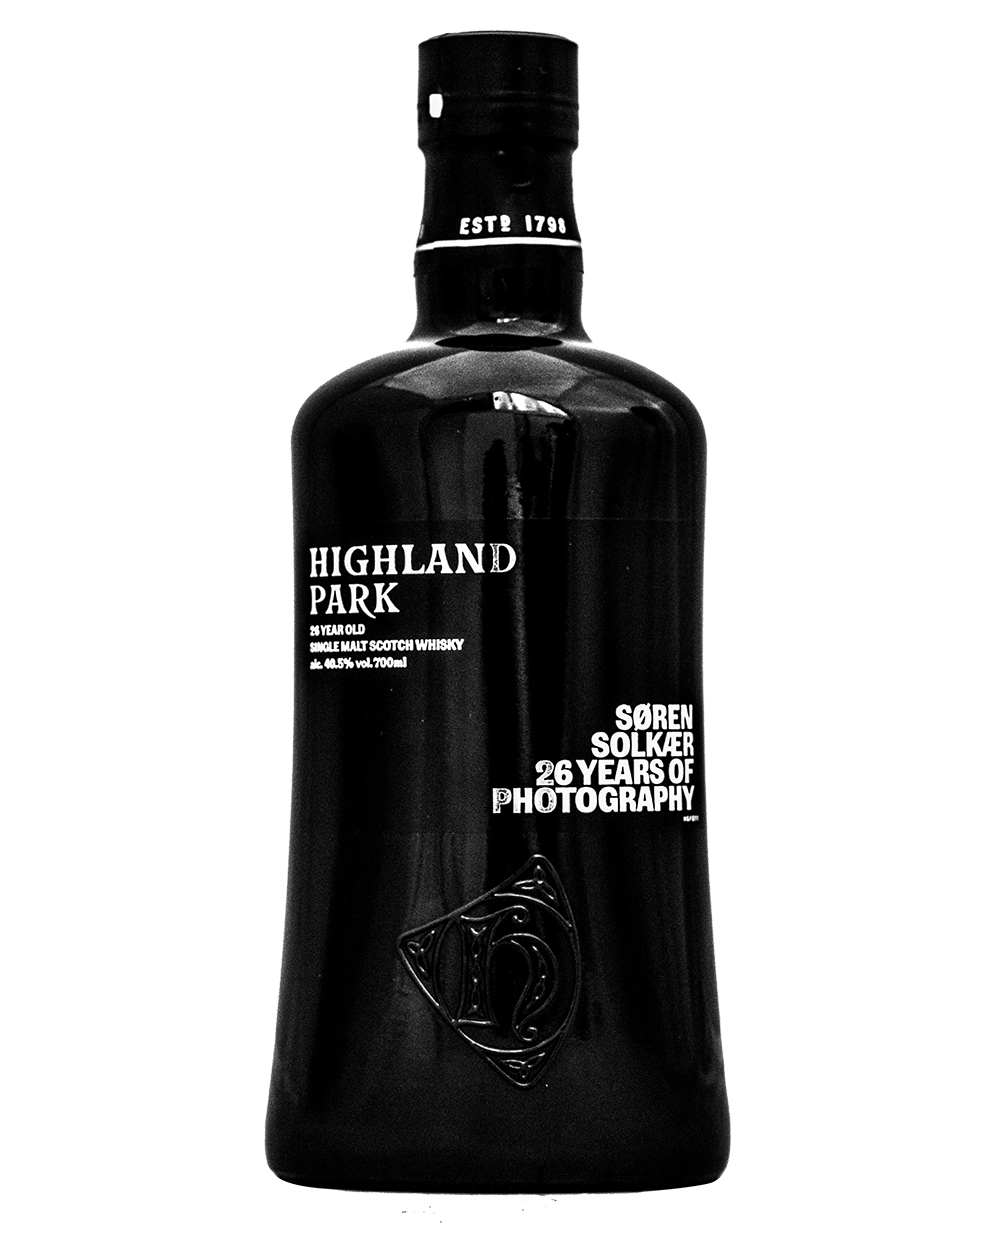 Highland Park Soren Solkaer - 26 Years of Photography Musthave Malts MHM